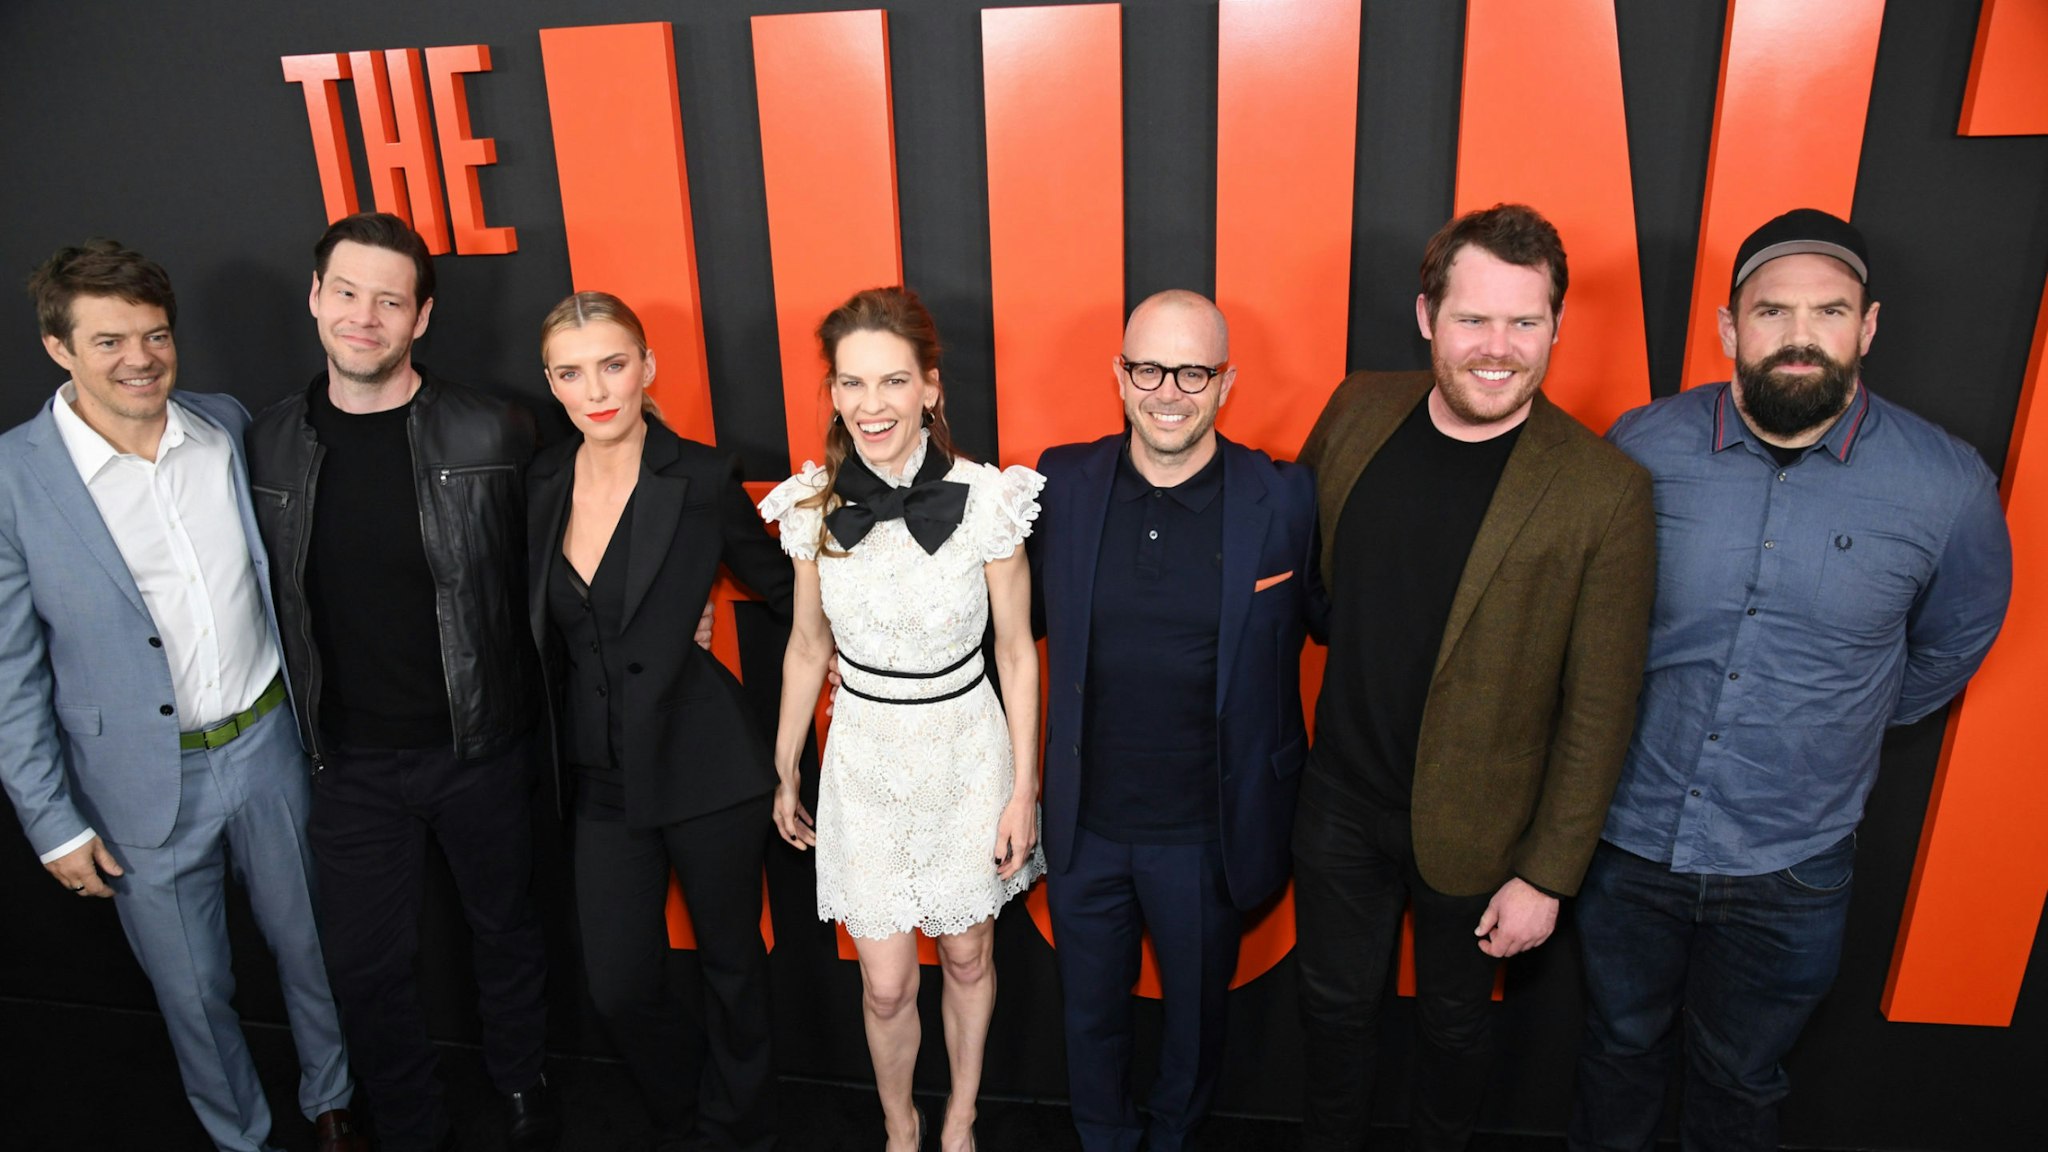 Producer Jason Blum, actors Ike Barinholtz, Betty Gilpin, Hilary Swank, producer Damon Lindelof, writer Nick Cuse and actor Ethan Suplee arrive for a special screening of Universal Pictures' "The Hunt," March 9, 2020 at the Arclight Cinema in Hollywood.